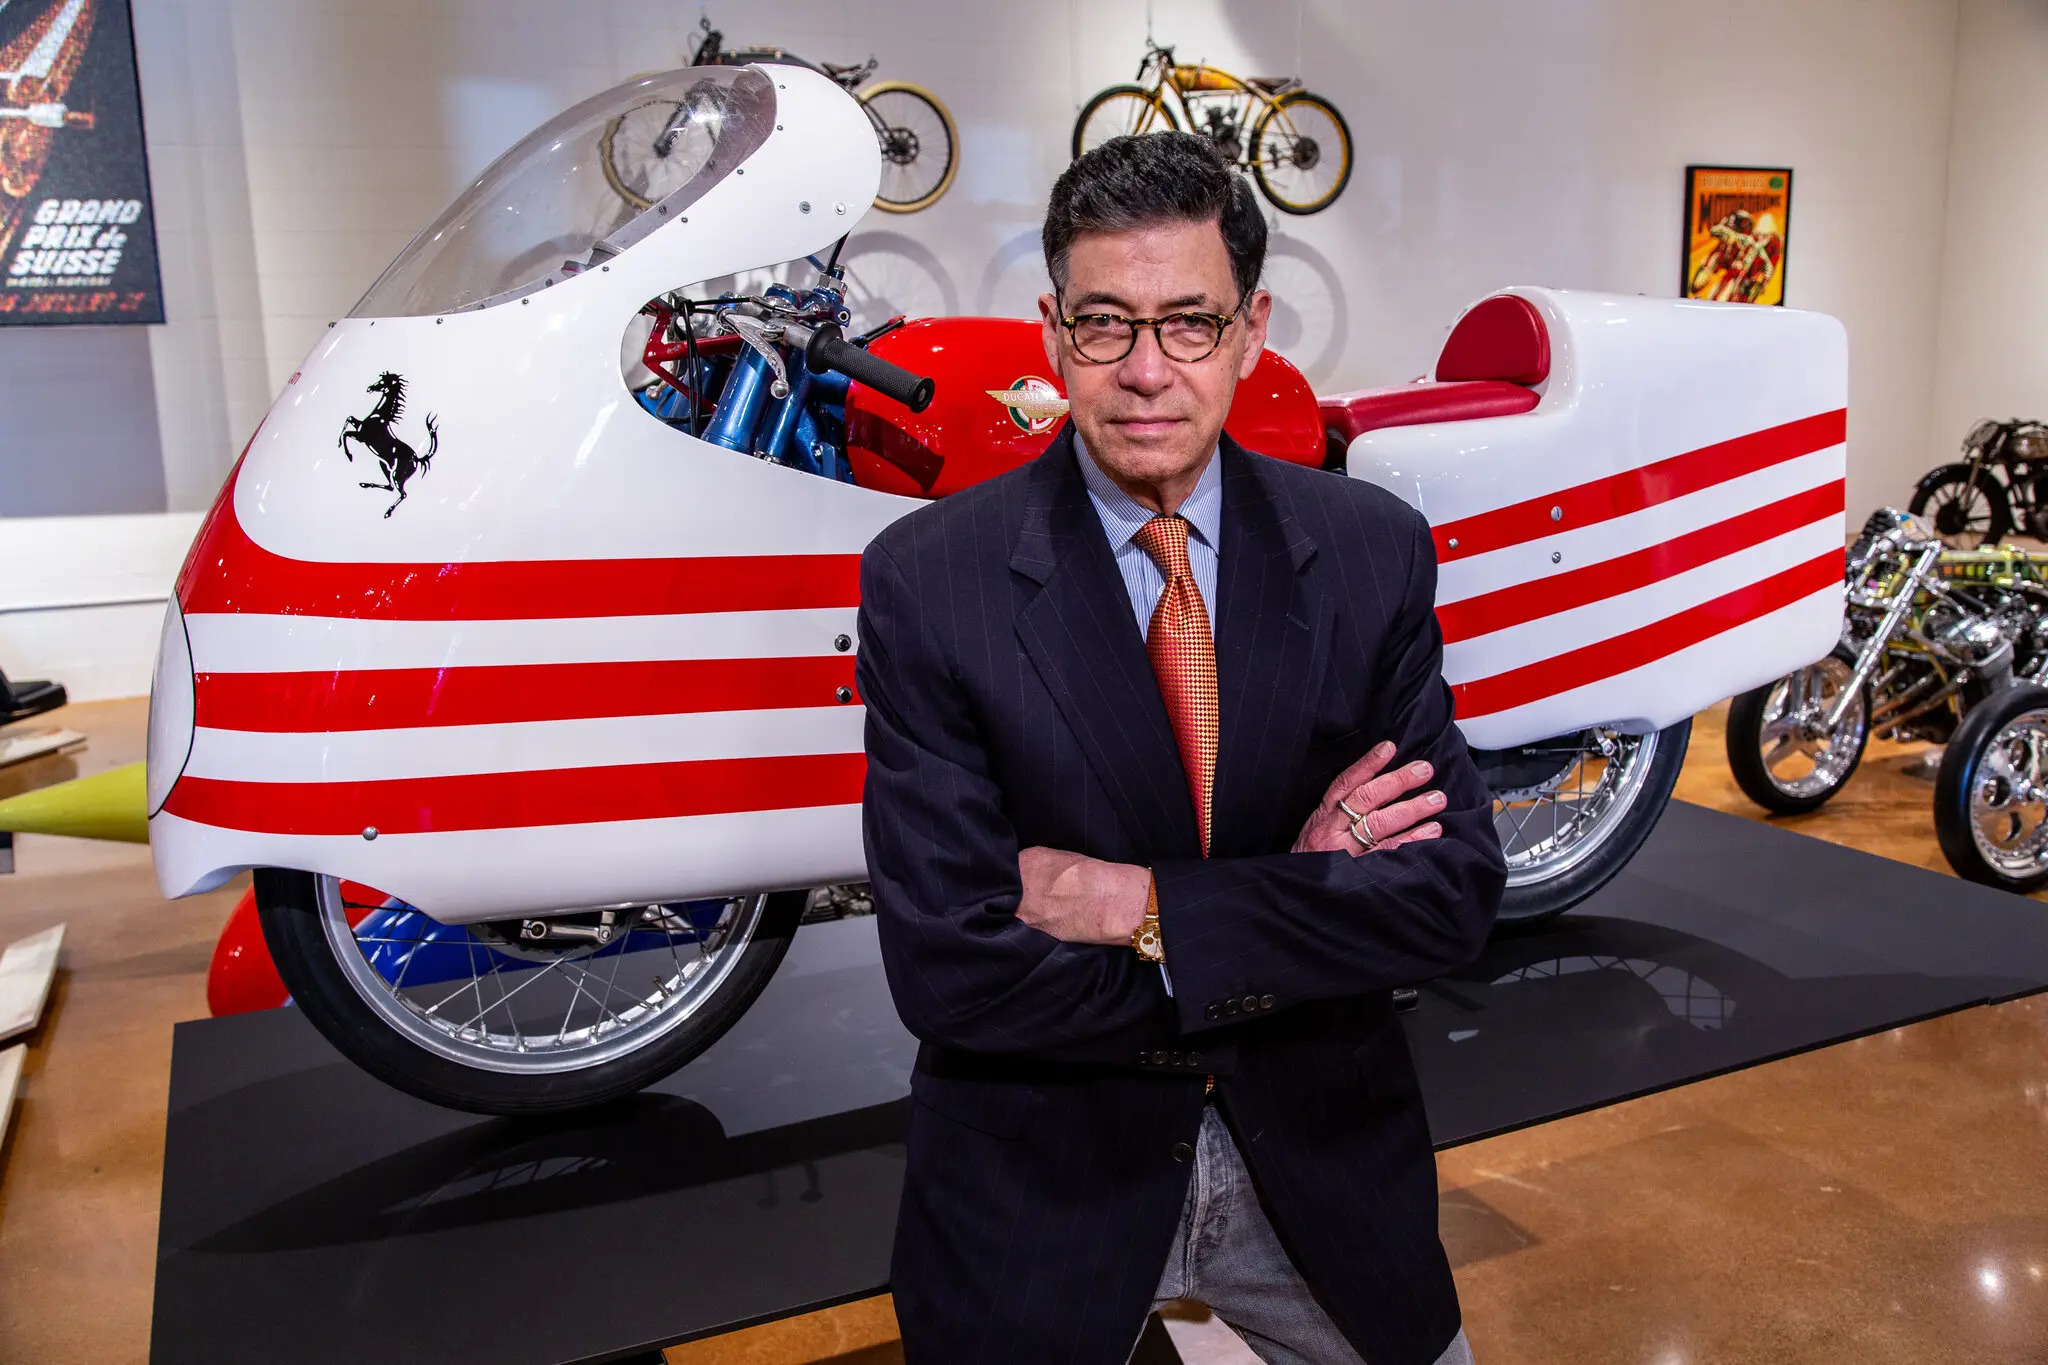 Mr. Haas in 2021 with a 1958 Ducati Trialbero Desmo at his motorcycle museum in Dallas